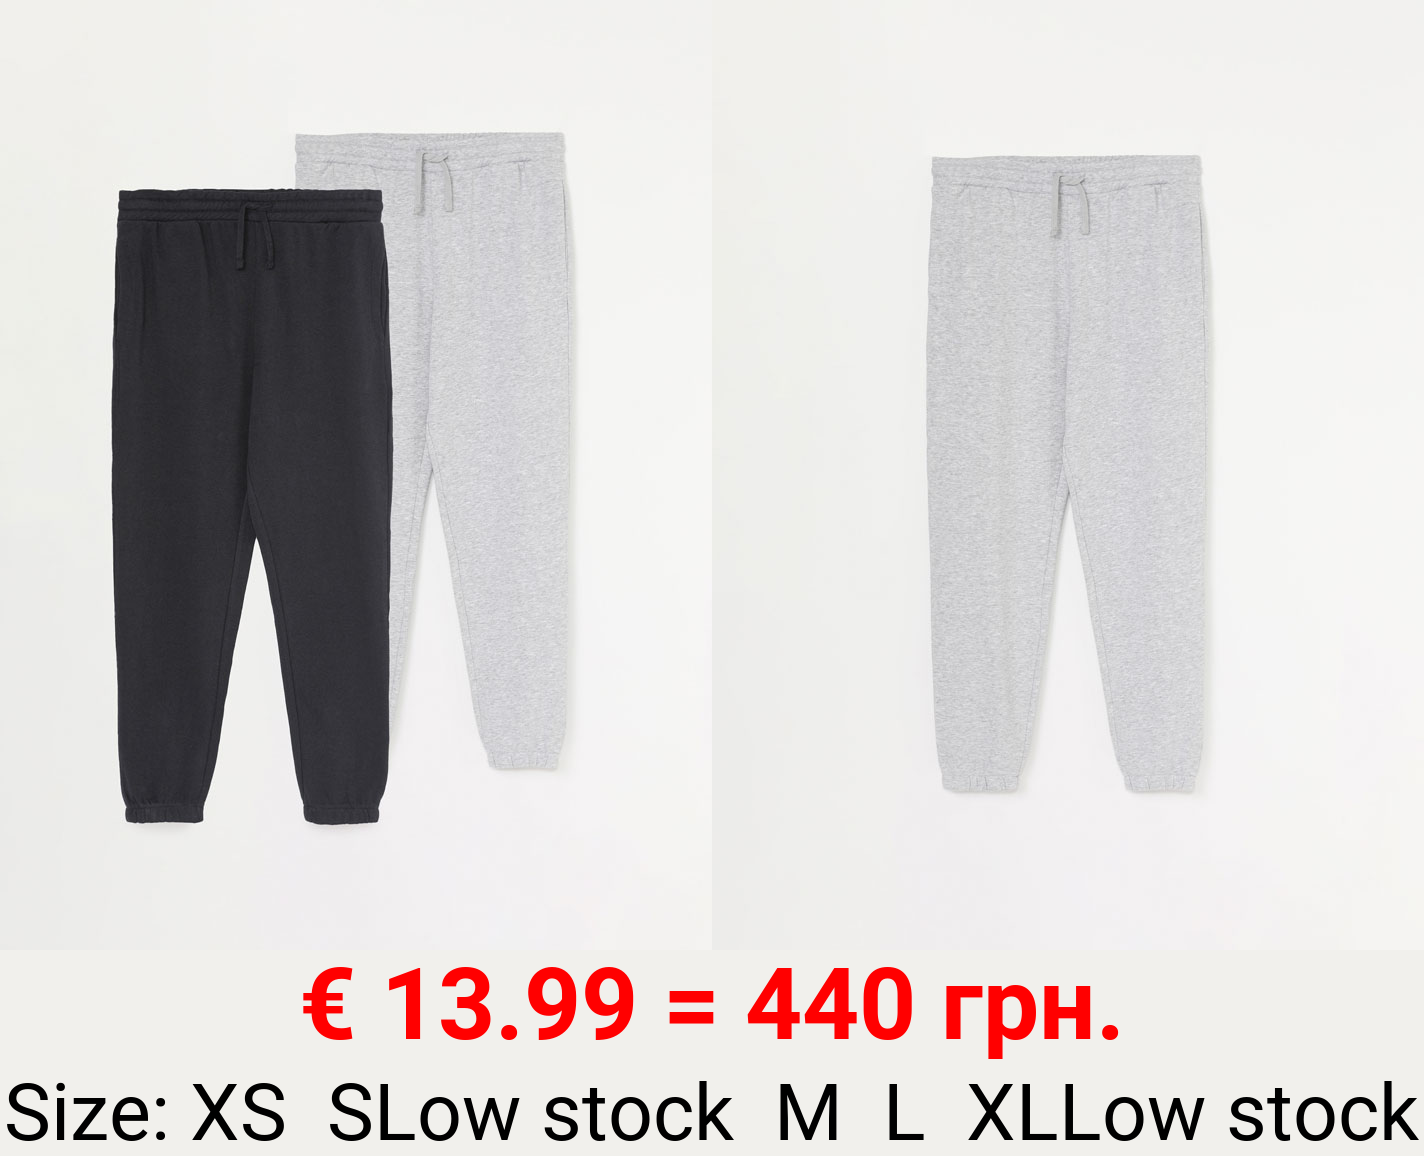 Pack of 2 pairs of basic joggers